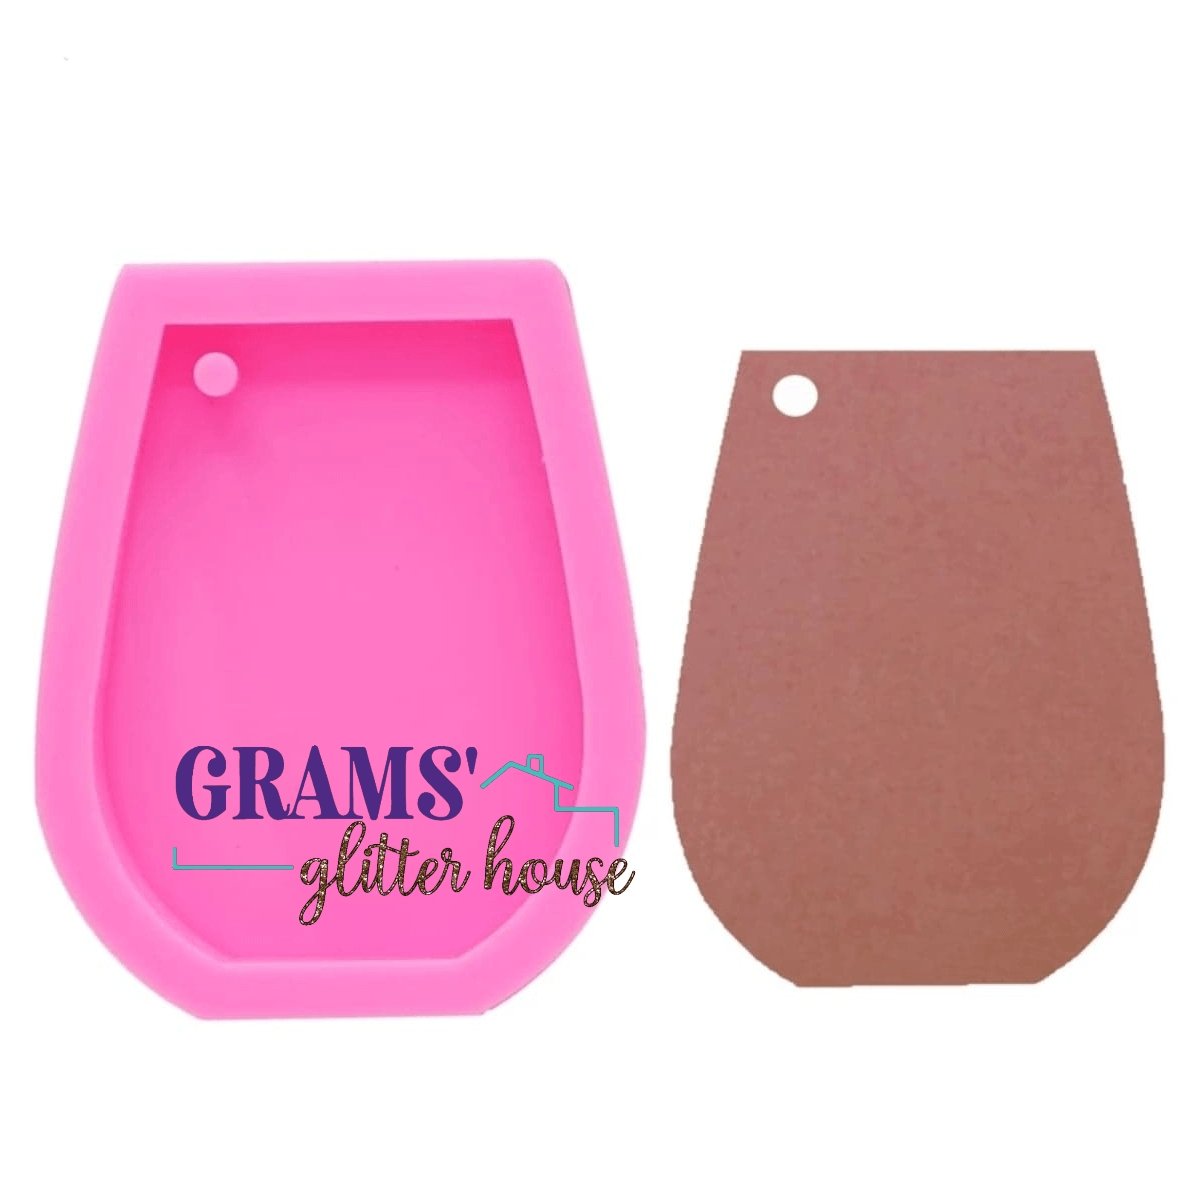 Grams' Glitter House Stemless Wineglass Keychain Mold silicone mold